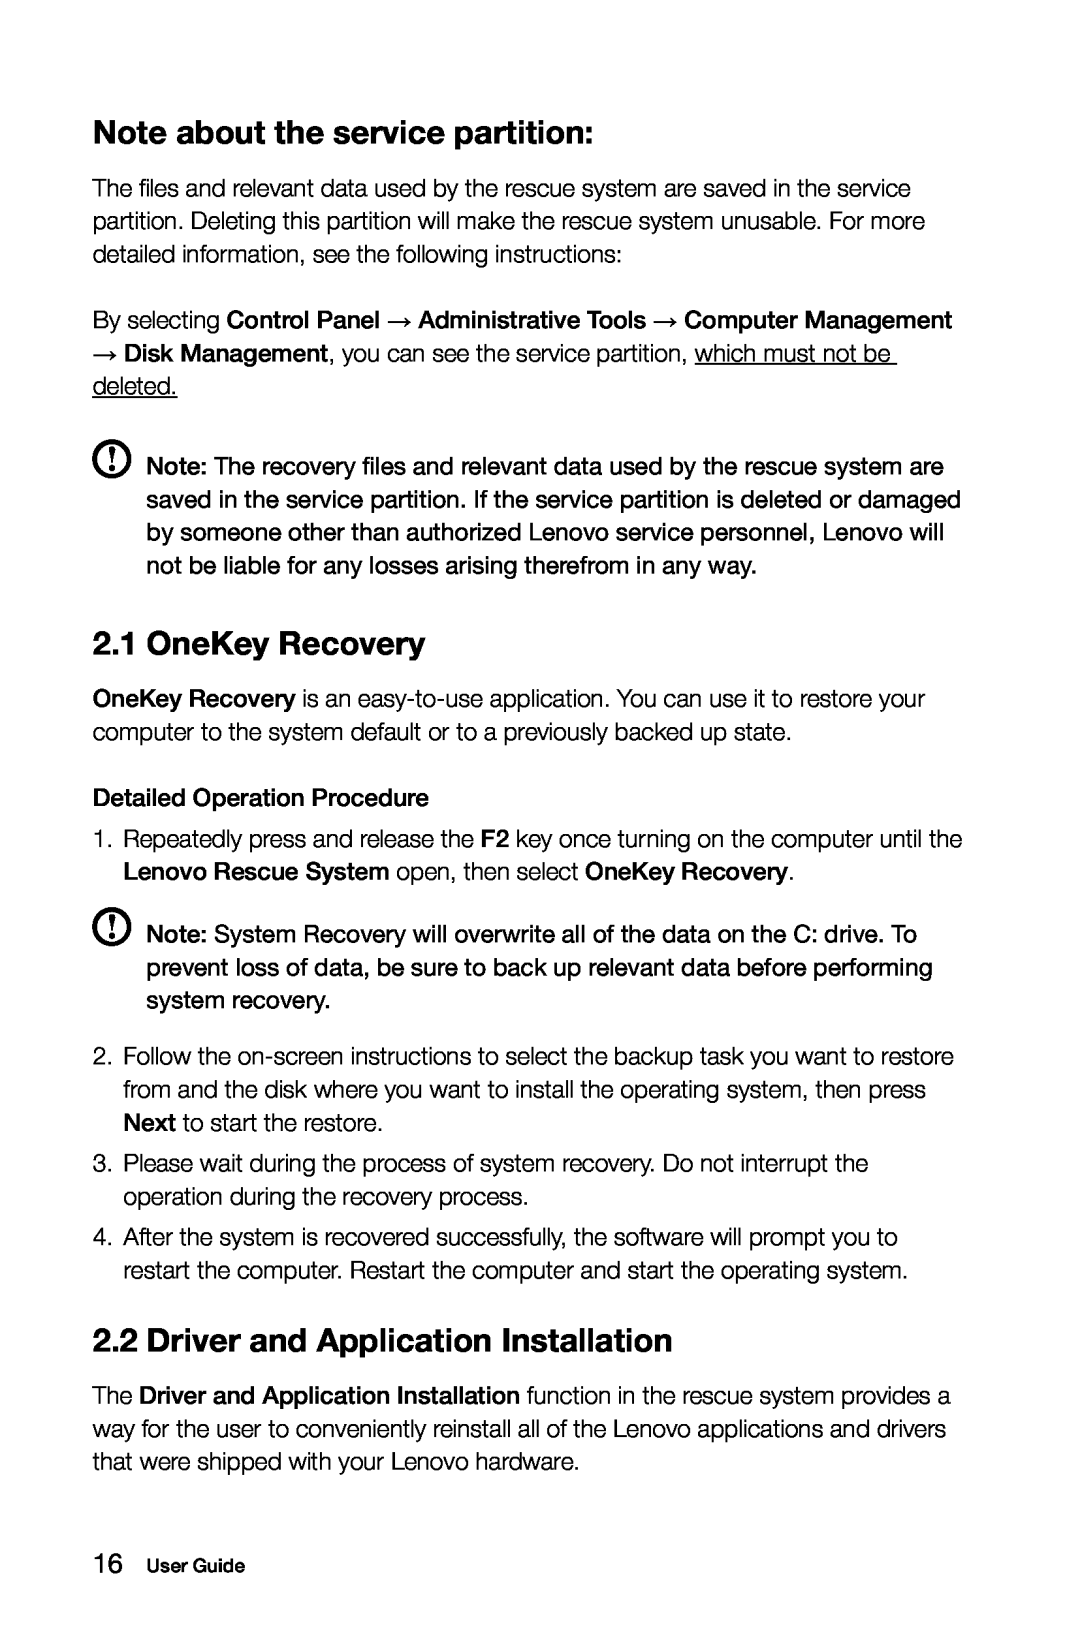 Lenovo 10059/7723, 10068/7752 manual Note about the service partition, OneKey Recovery, Driver and Application Installation 